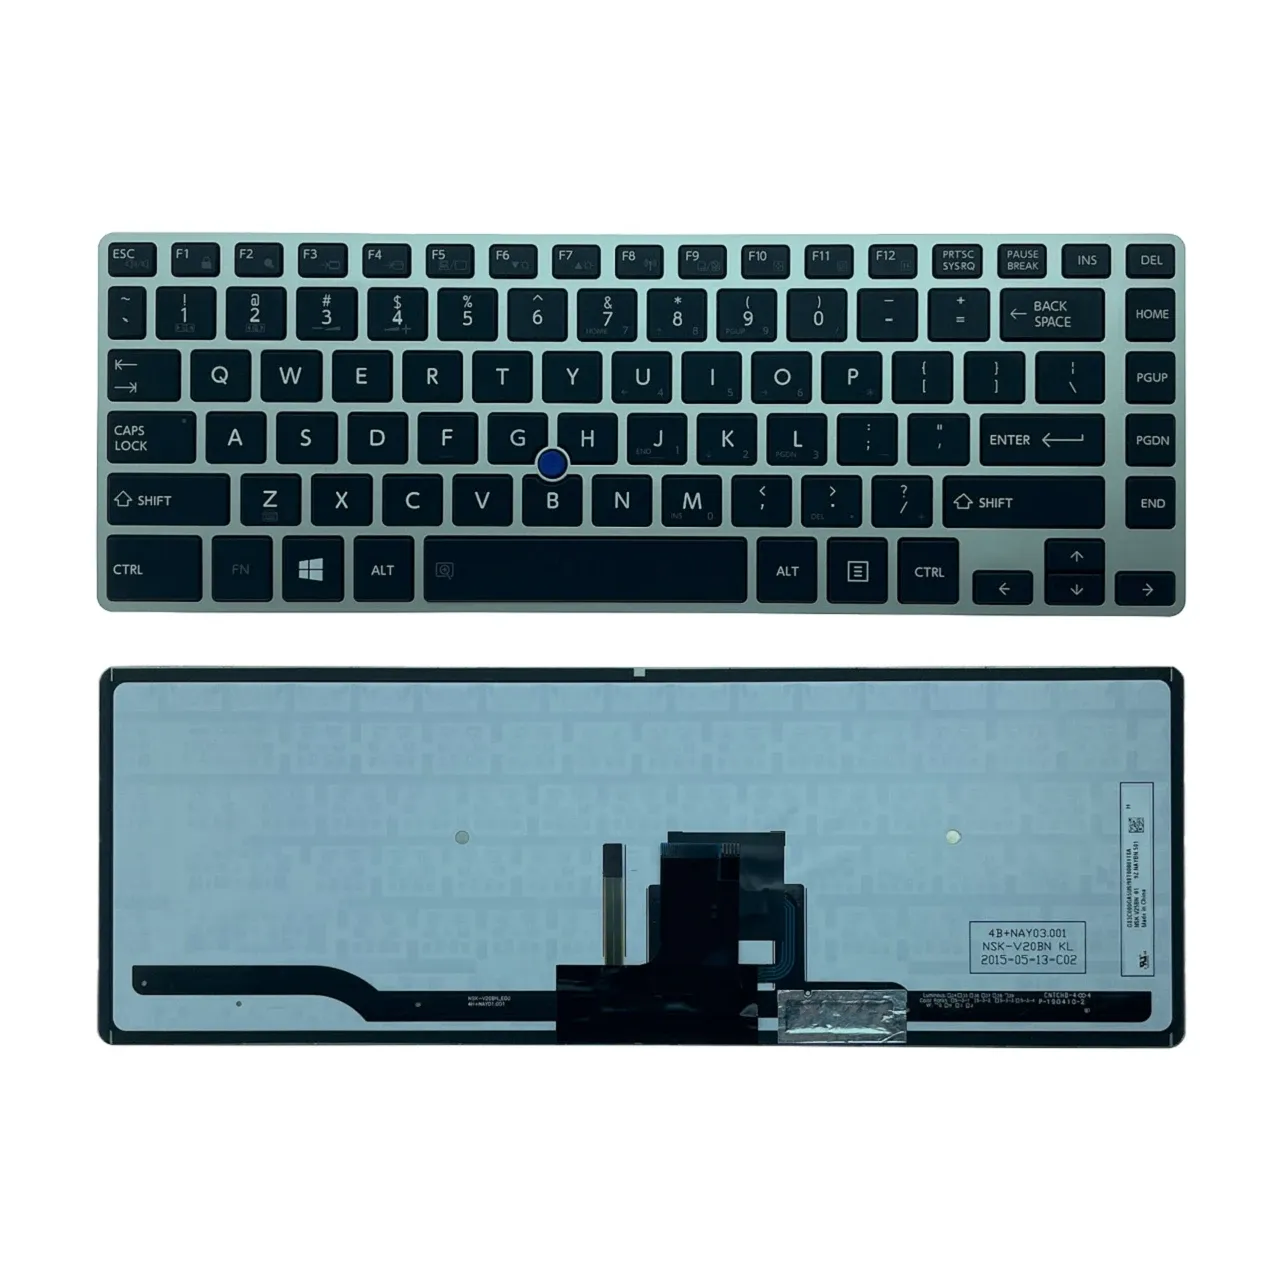 Keyboards New US Laptop Backlit Keyboard For Toshiba Tecra Z40 Z40T Z40A Z40AK Z40AB Z40B Z40TA Notebook PC Replacement